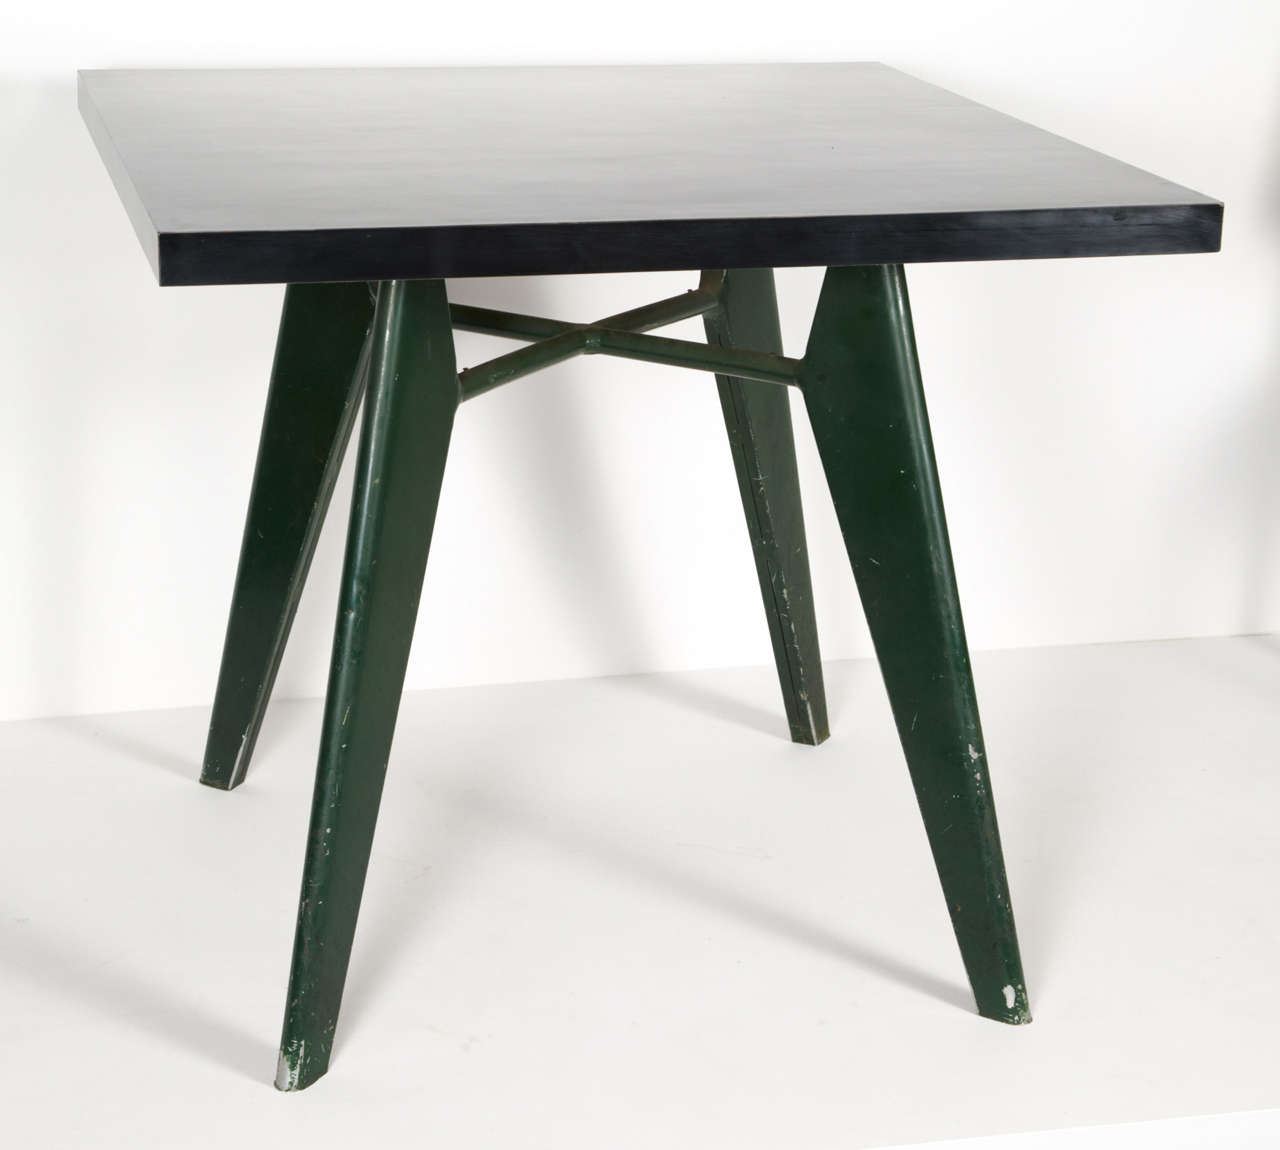 Occasional table with a square wooden plated
with black apparent formica top resting on four
tapering legs linked by a crosspiece in the same
material.
Provenance : Cameroun, circa 1955.
Dimensions : H. 3 x 34 1/5 x 34 1/5 in